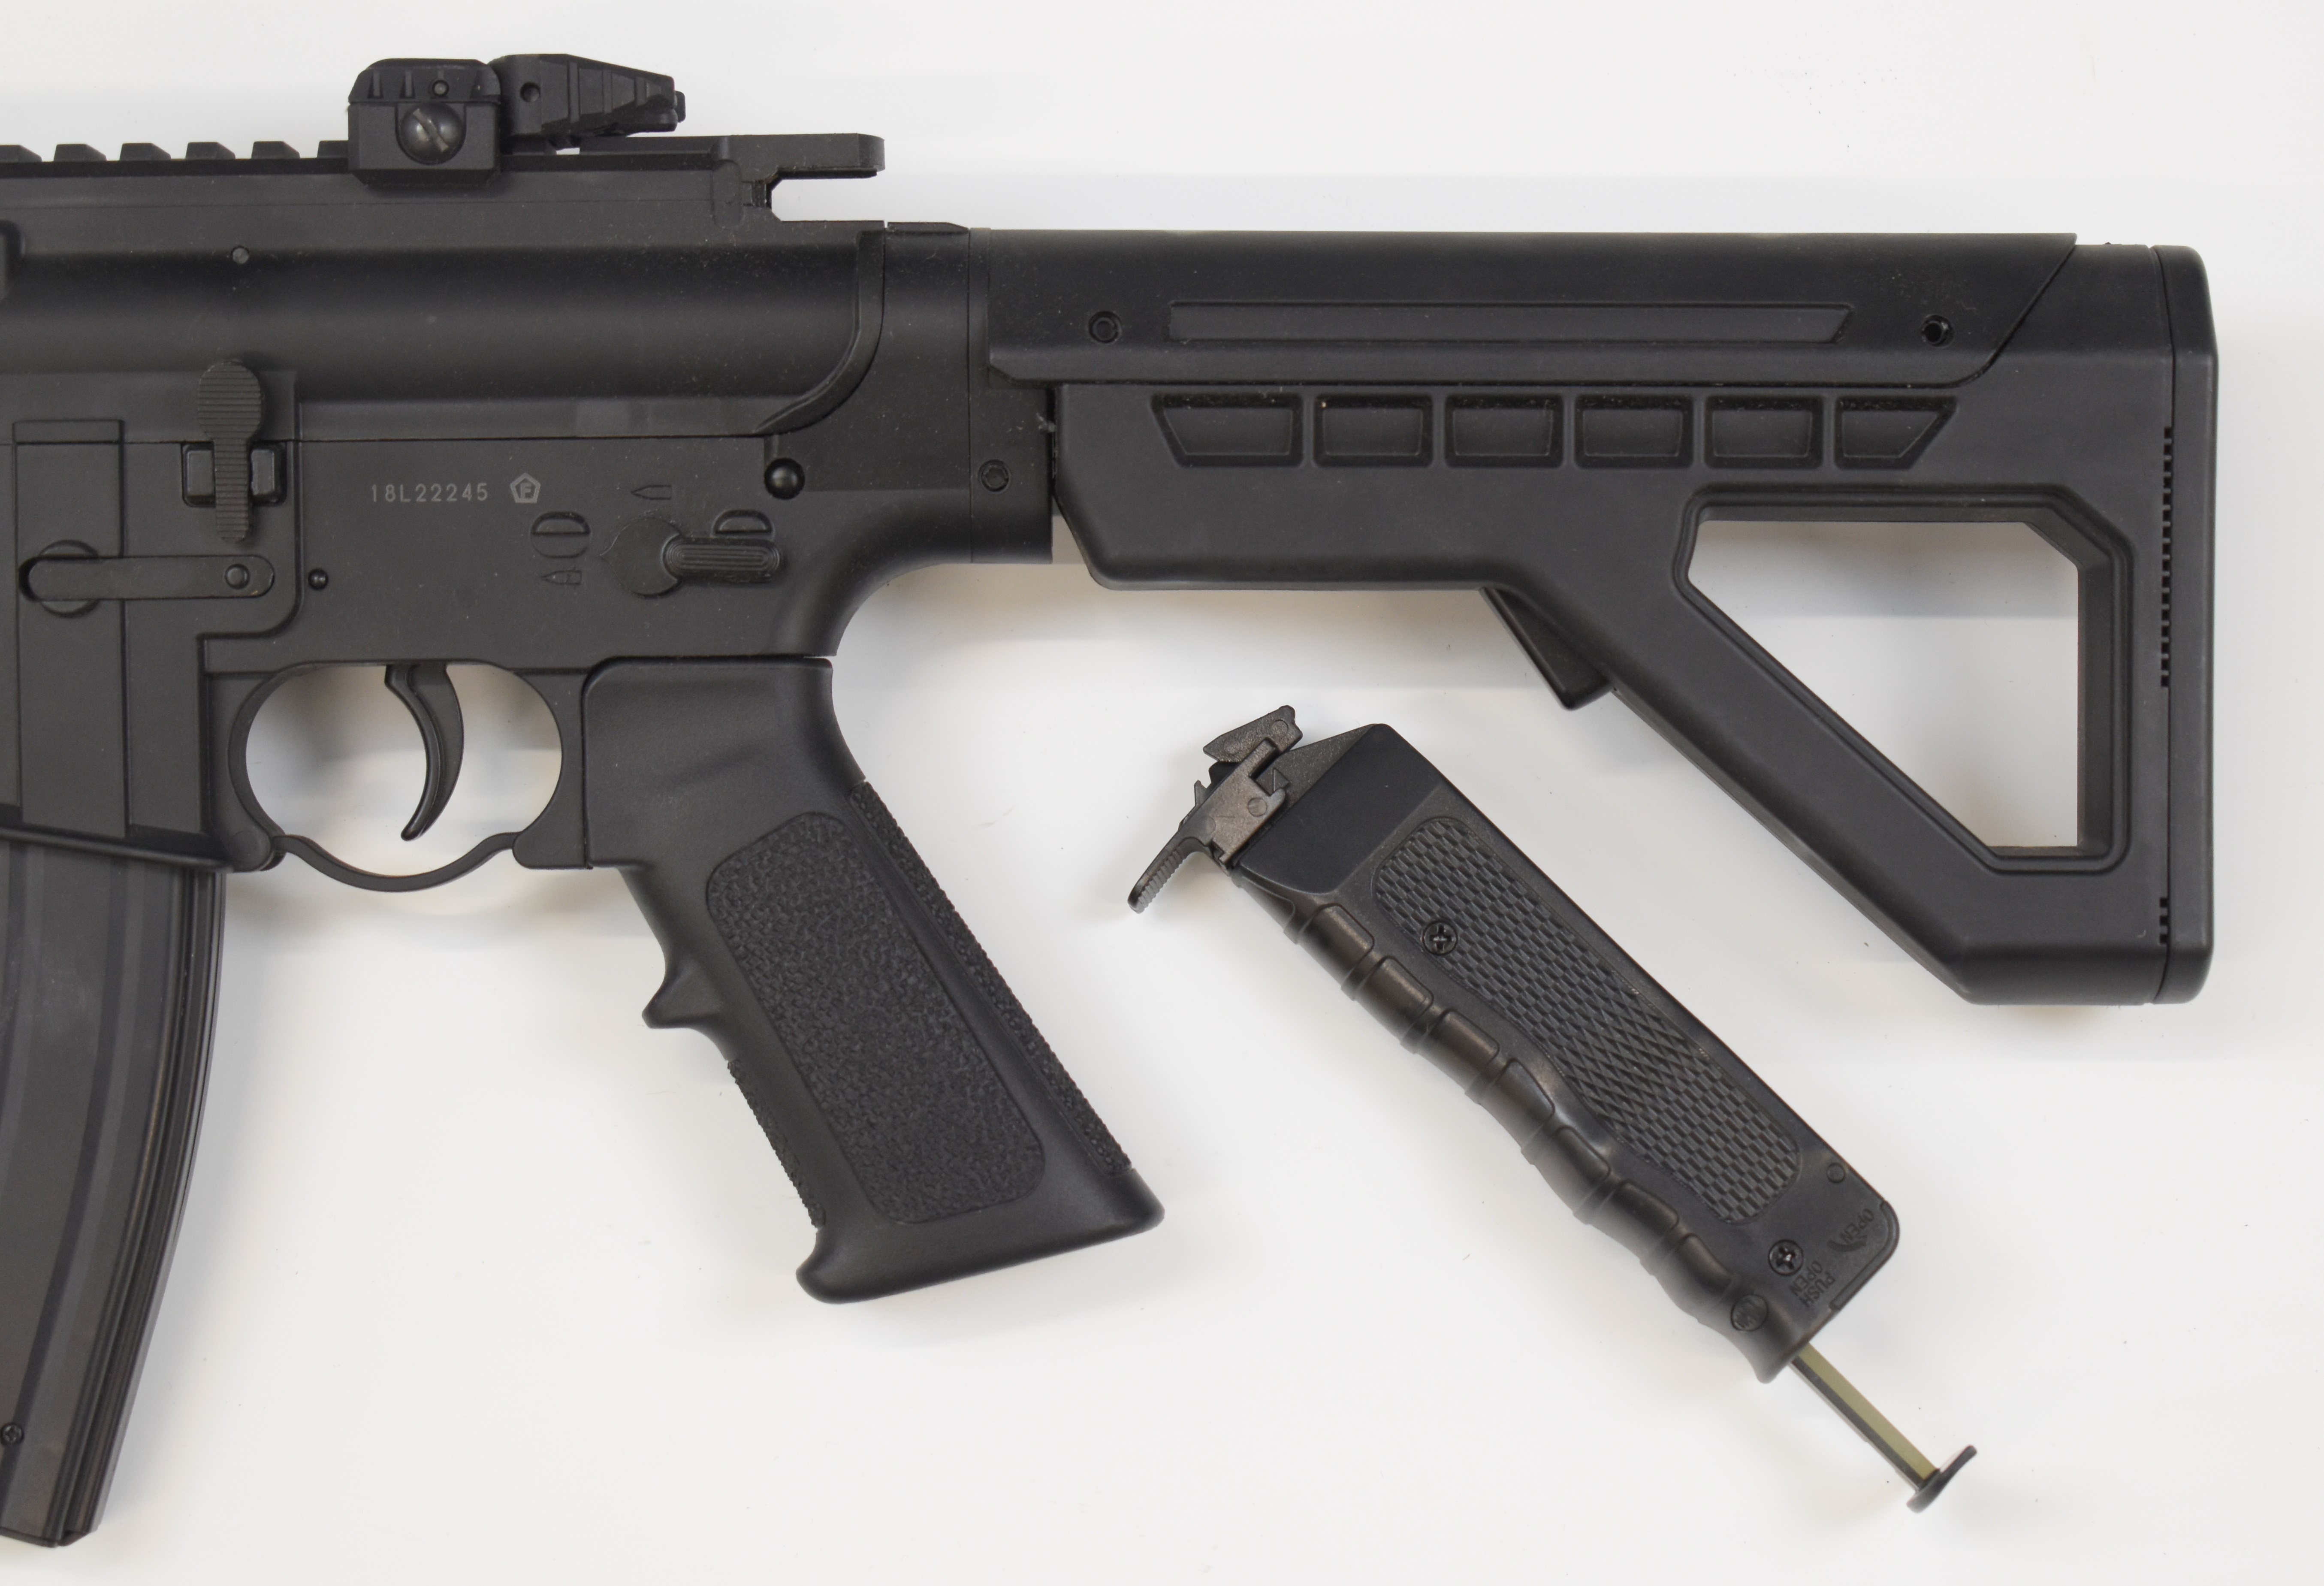 Crosman SBR .177 CO2 assault style air rifle with textured pistol grip, tactical stock, multi-shot - Image 7 of 9